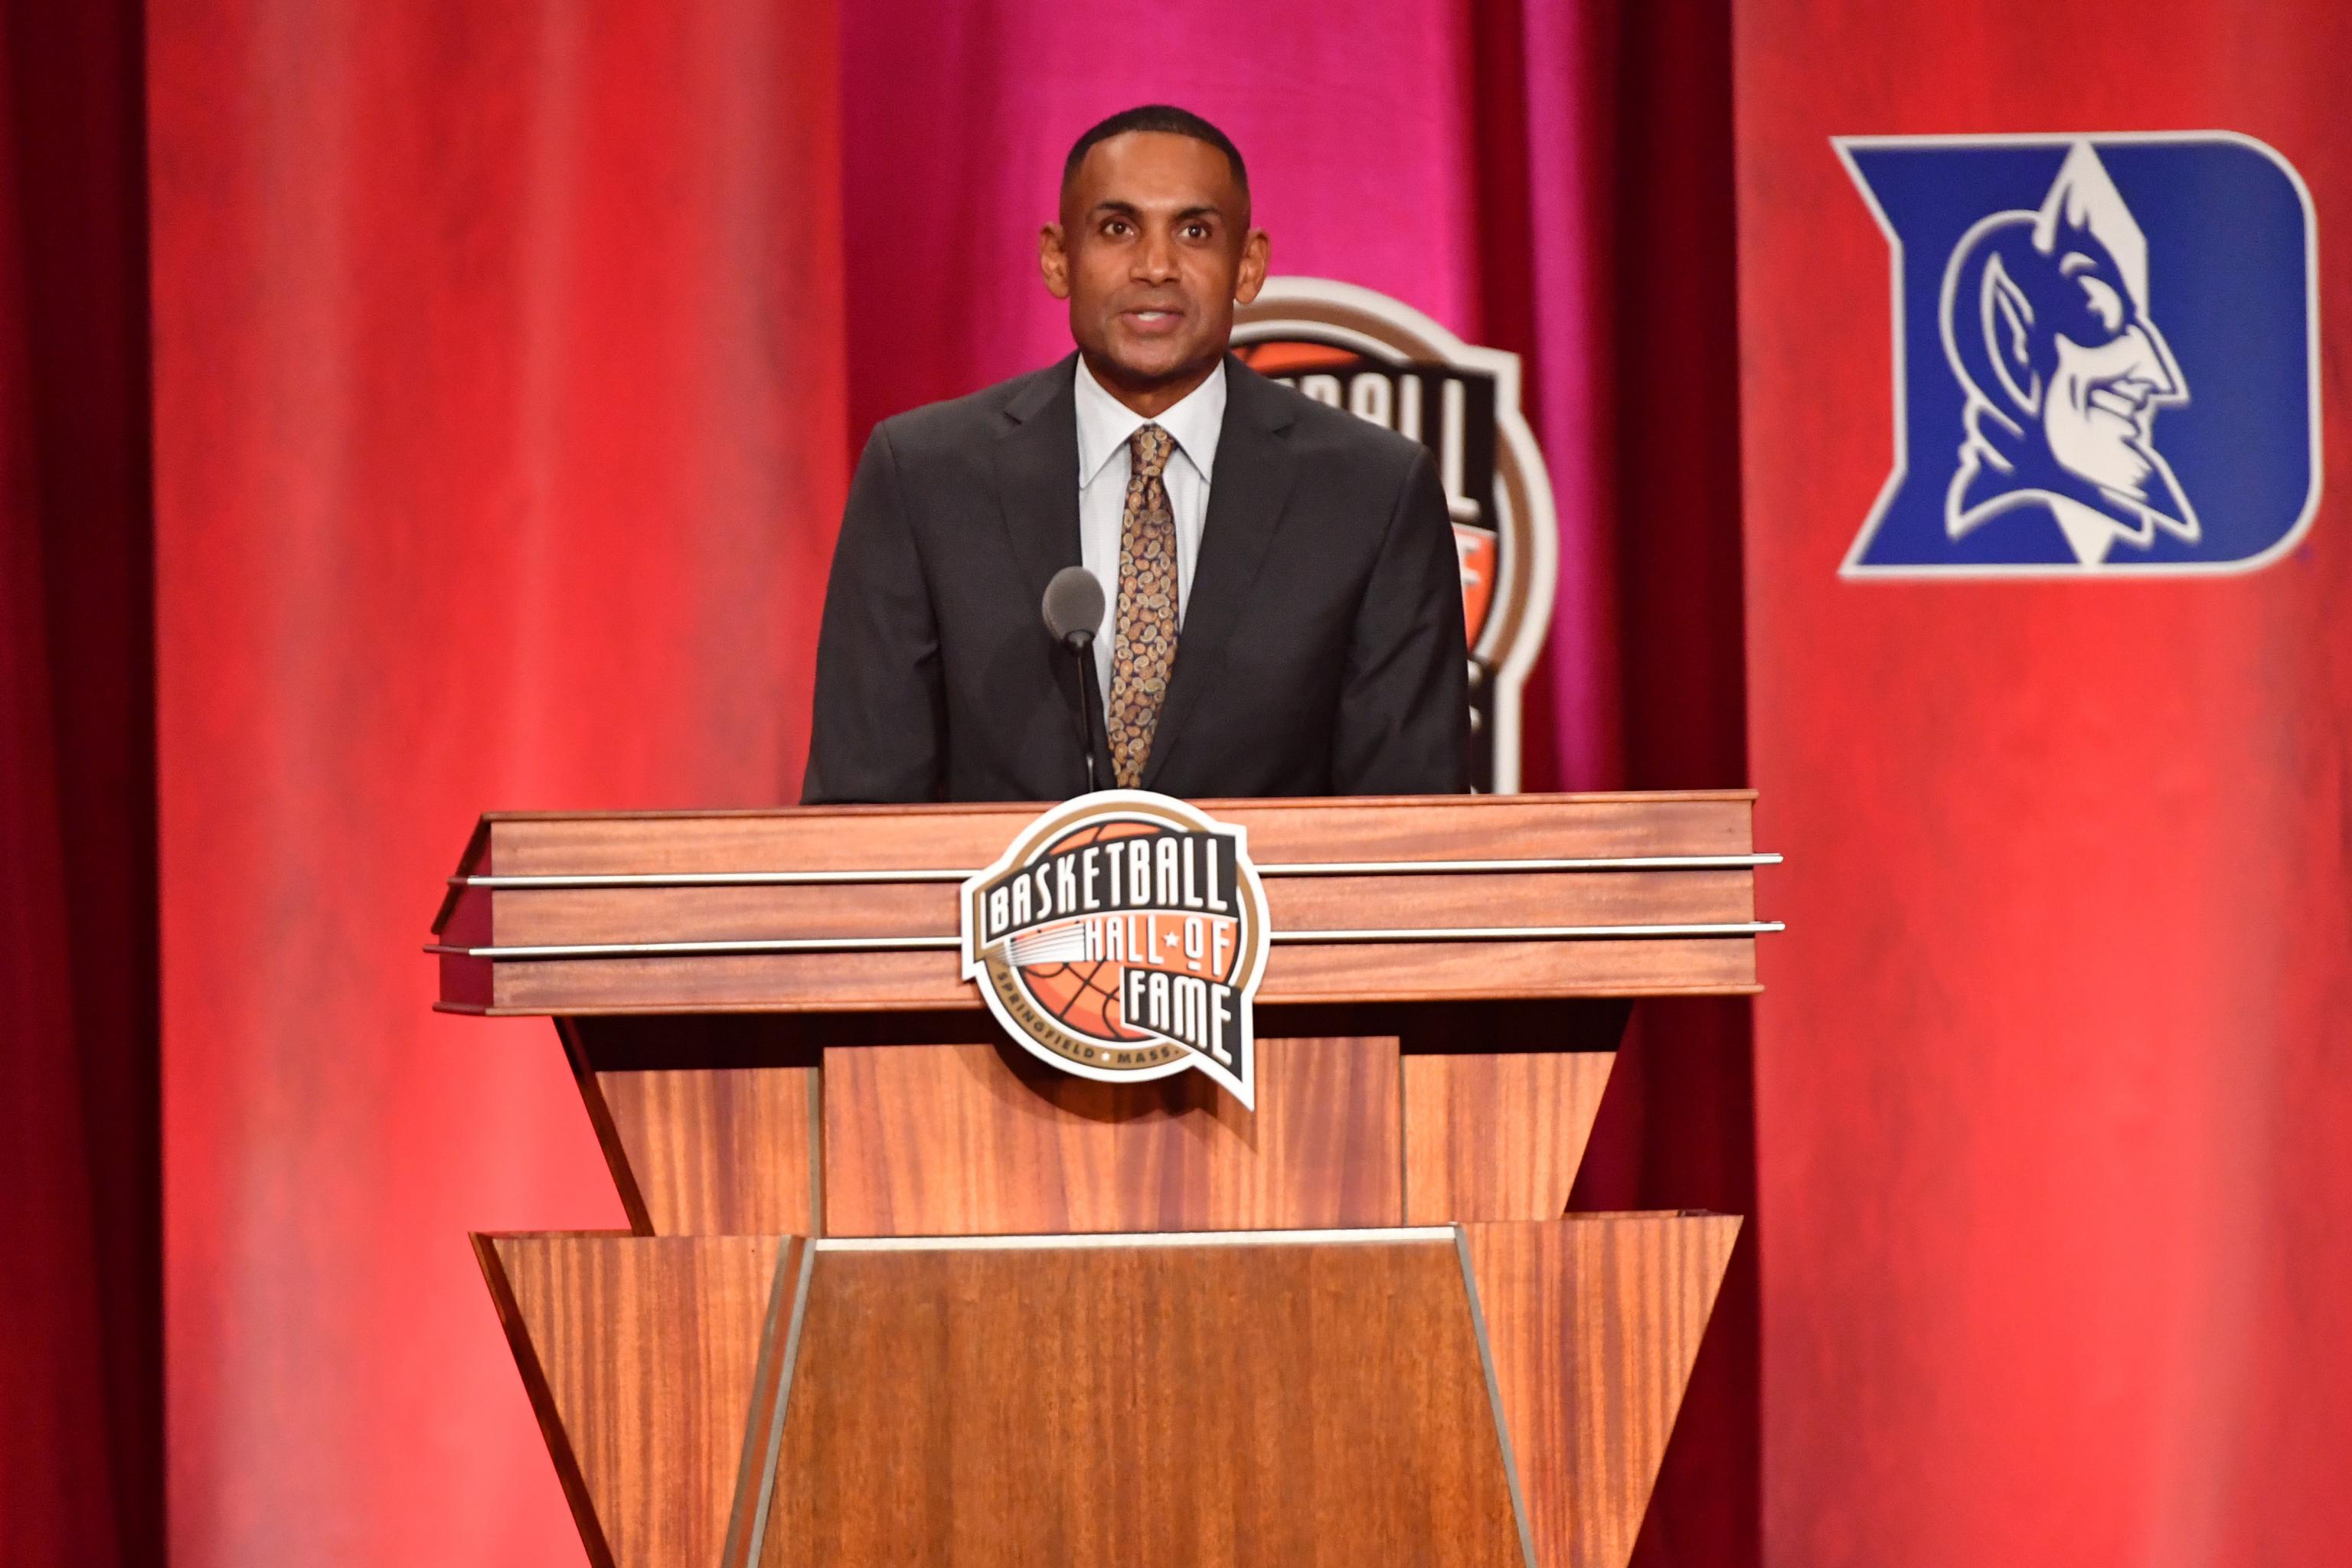 Basketball Hall of Fame 2018 Ceremony Recap, Speech Highlights and